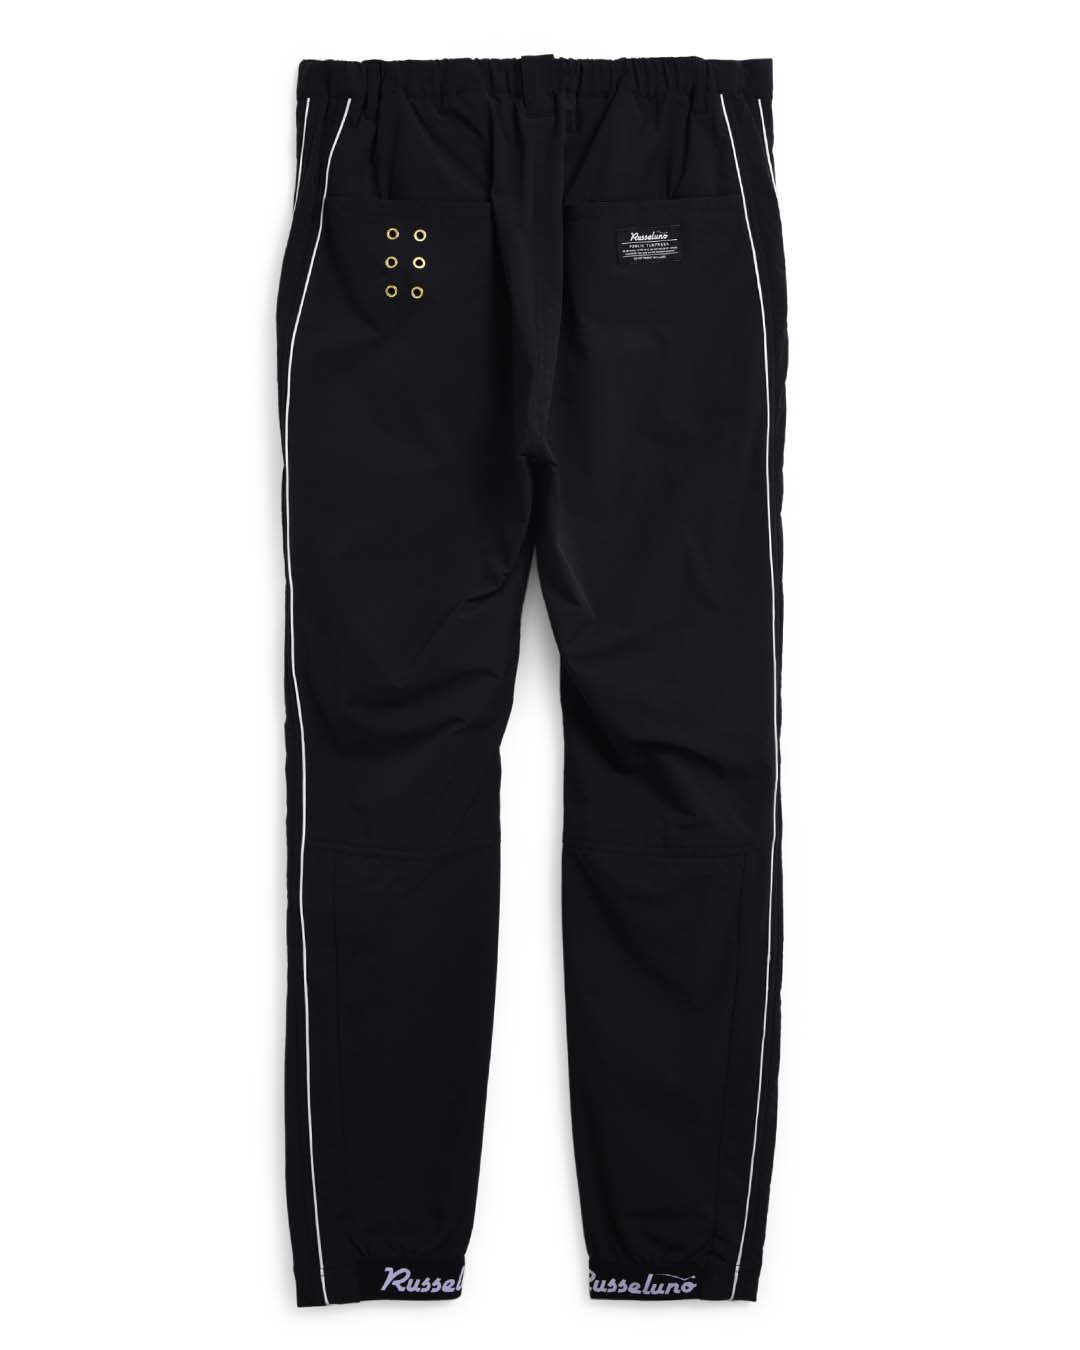 WIND STOP PANTS（SOLID)